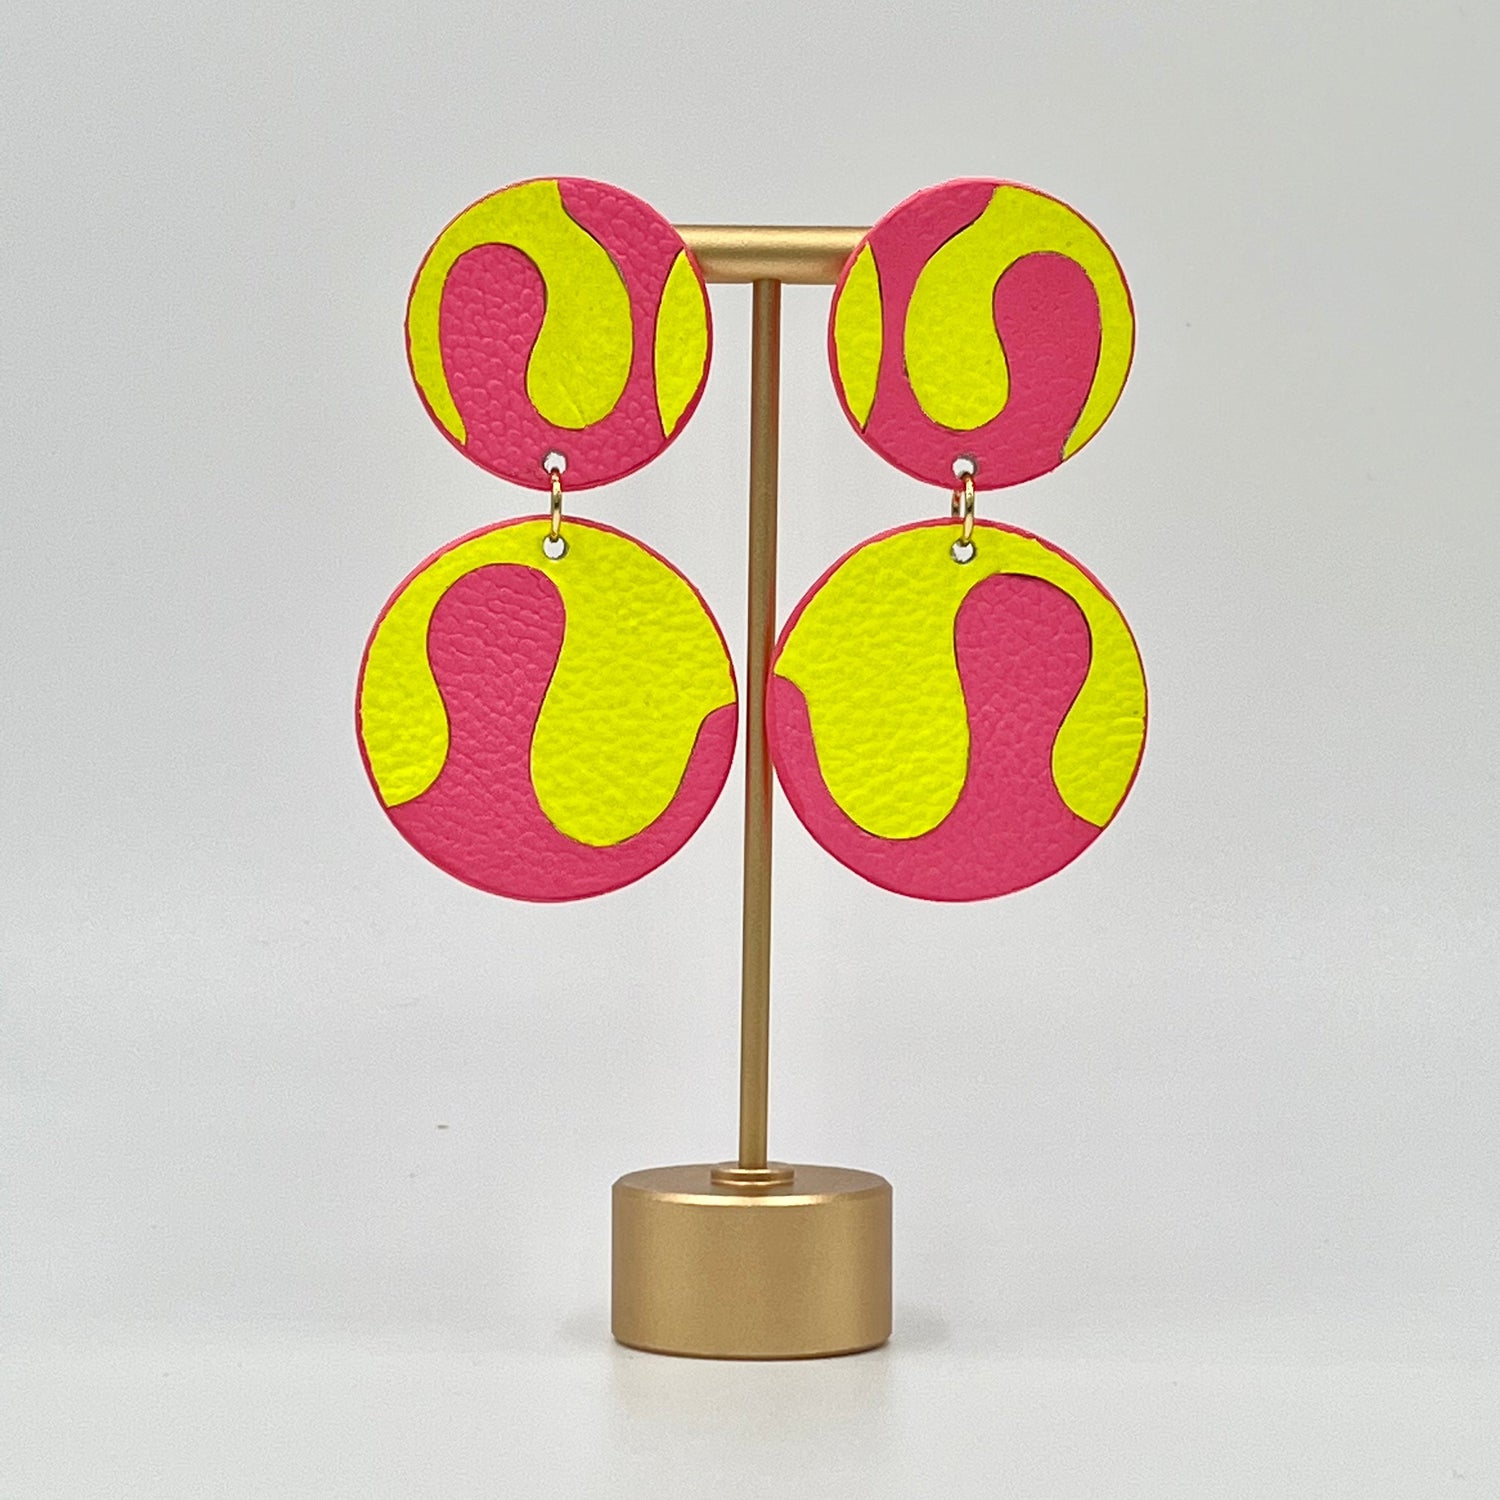 Brilliant Color earrings, yellow and Fuchsia Earrings, neon lightweight earrings, leather earrings